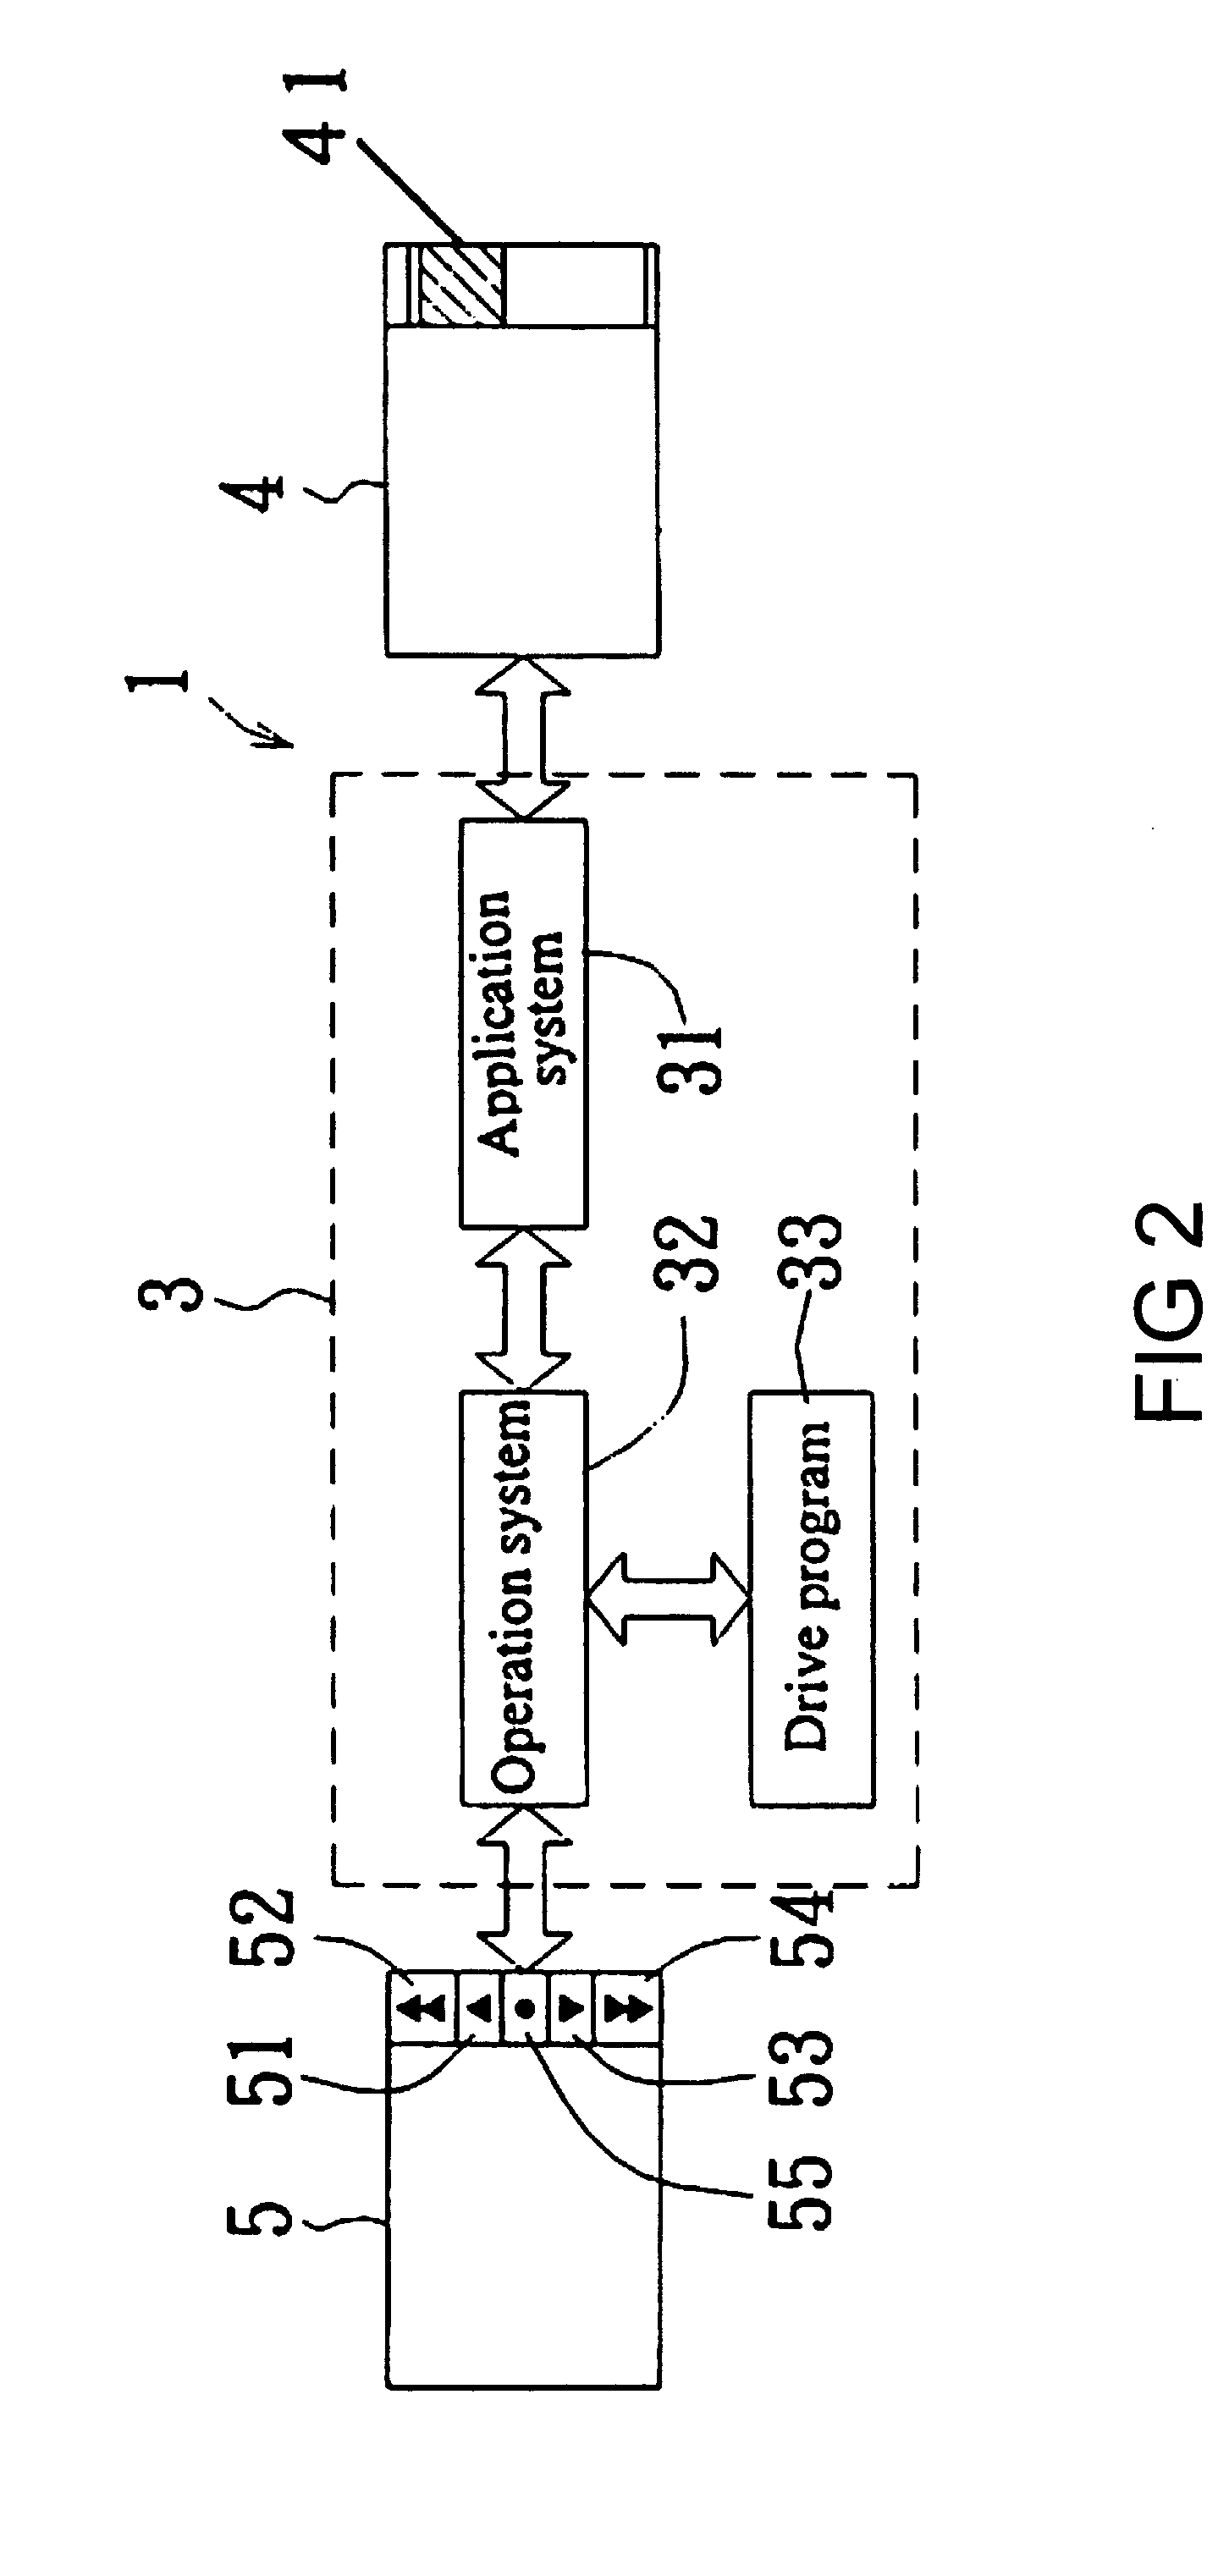 Method of scrolling window screen by means of controlling electronic device